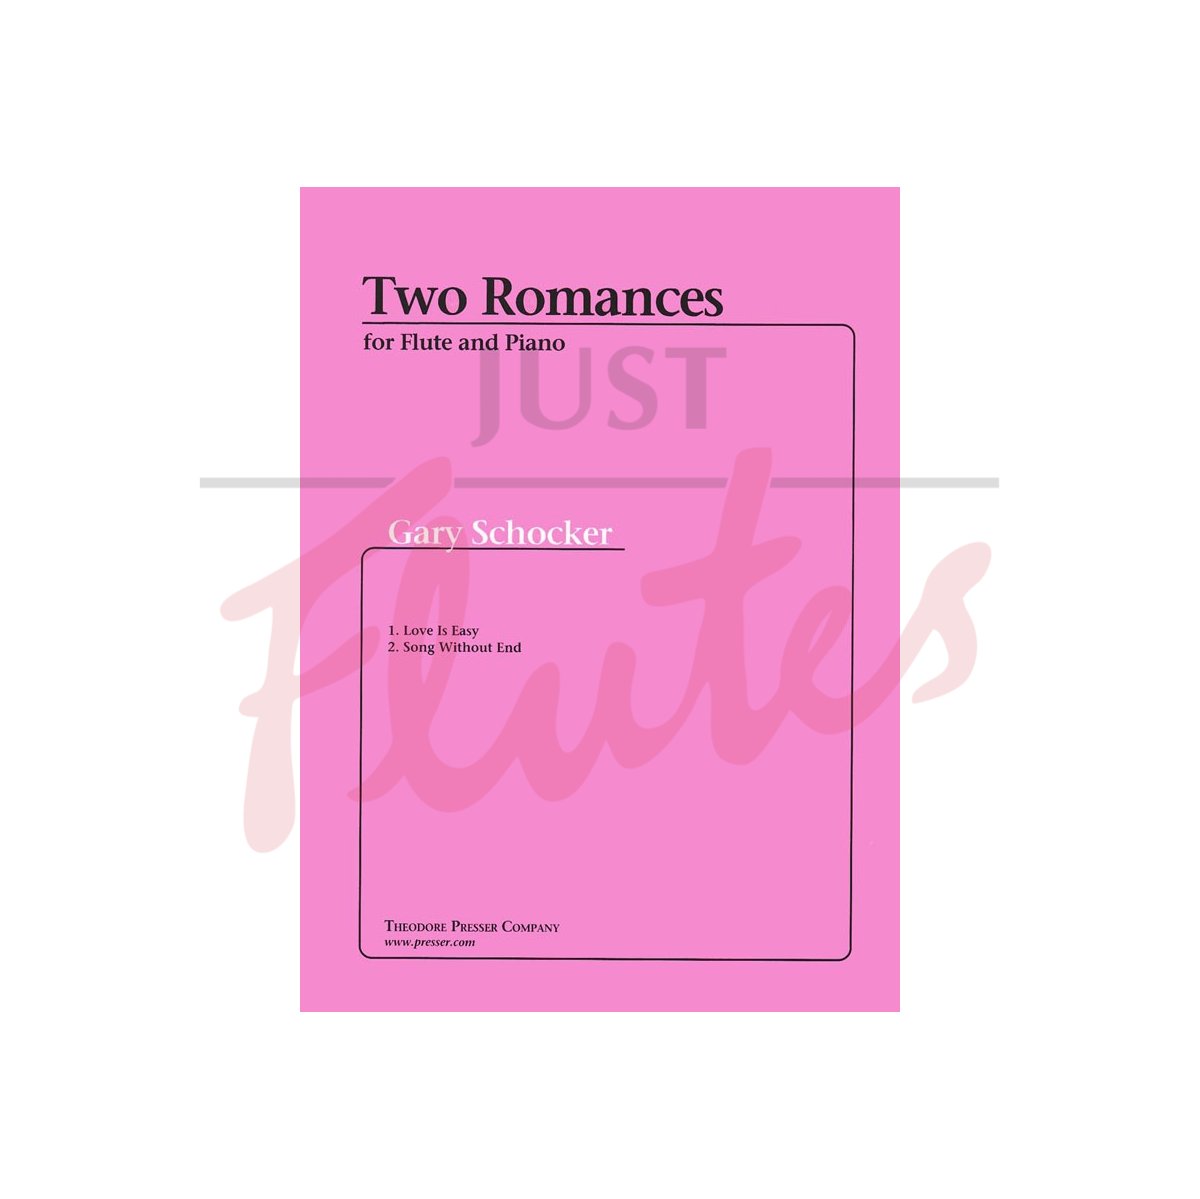 Two Romances for Flute and Piano